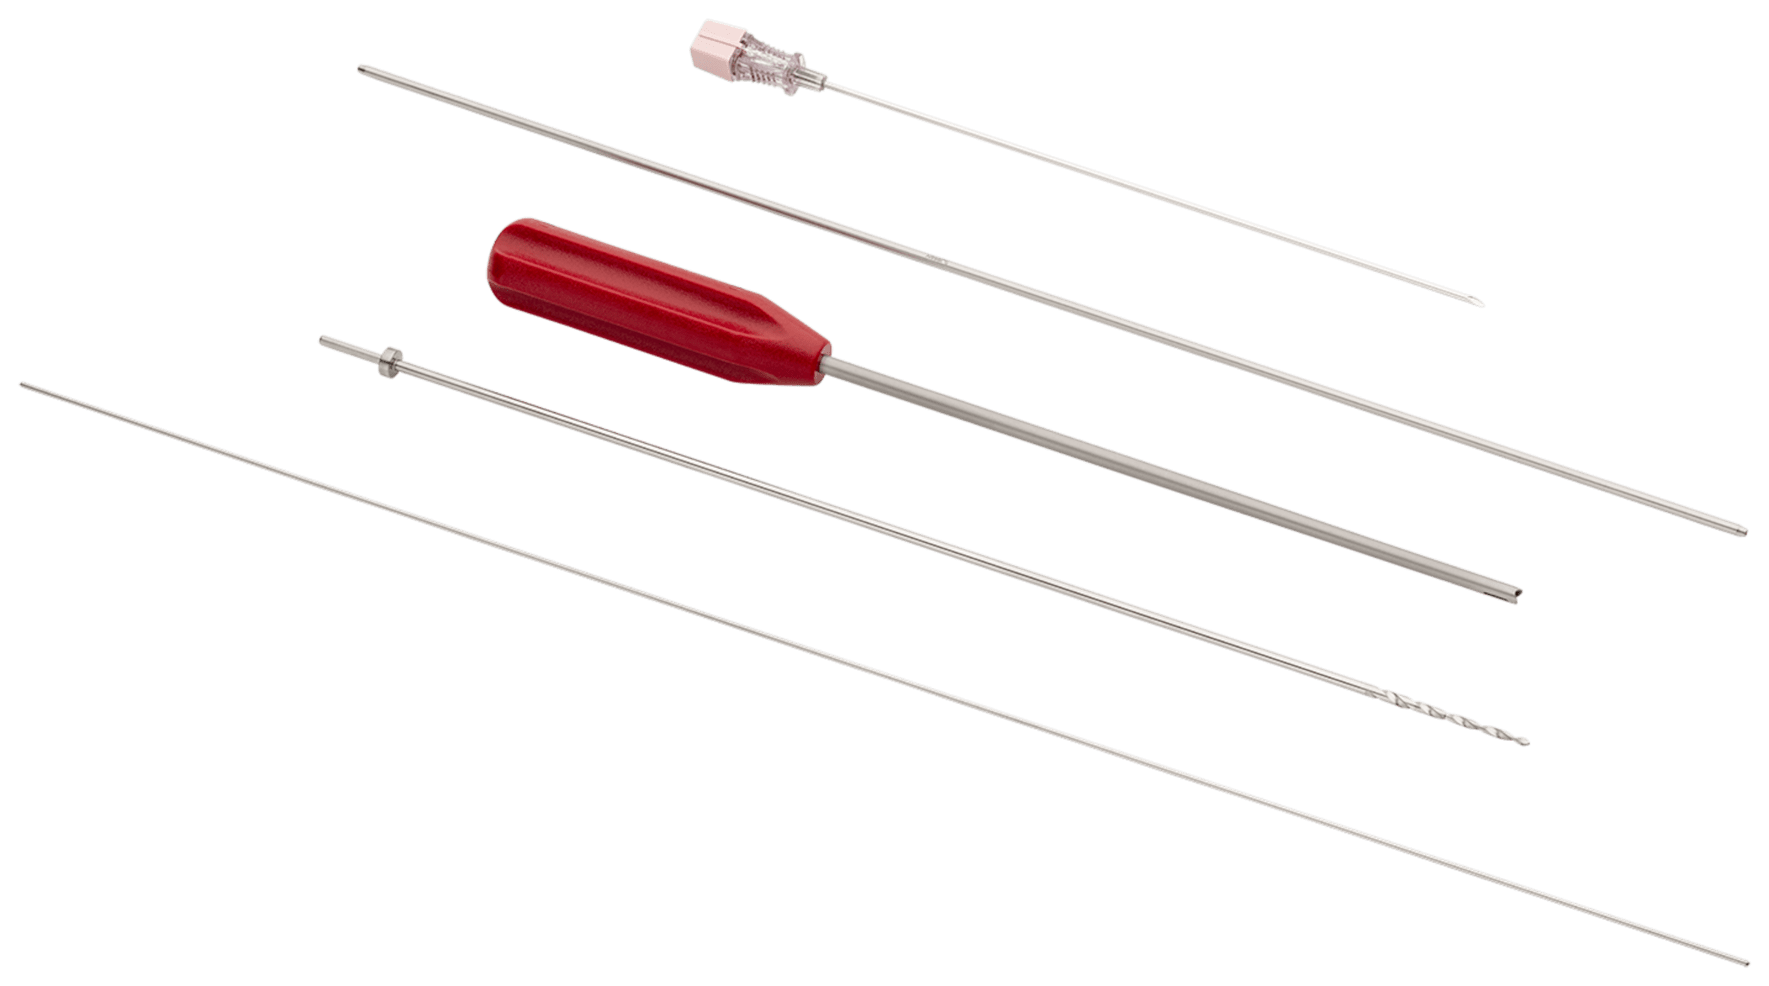 Percutaneous Insertion Kit for Knotless FiberTak Anchor, 1.8 mm (Includes: Spear, Dilator, Needle w/Stylet, Guide Pin, and 1.8 mm Drill)